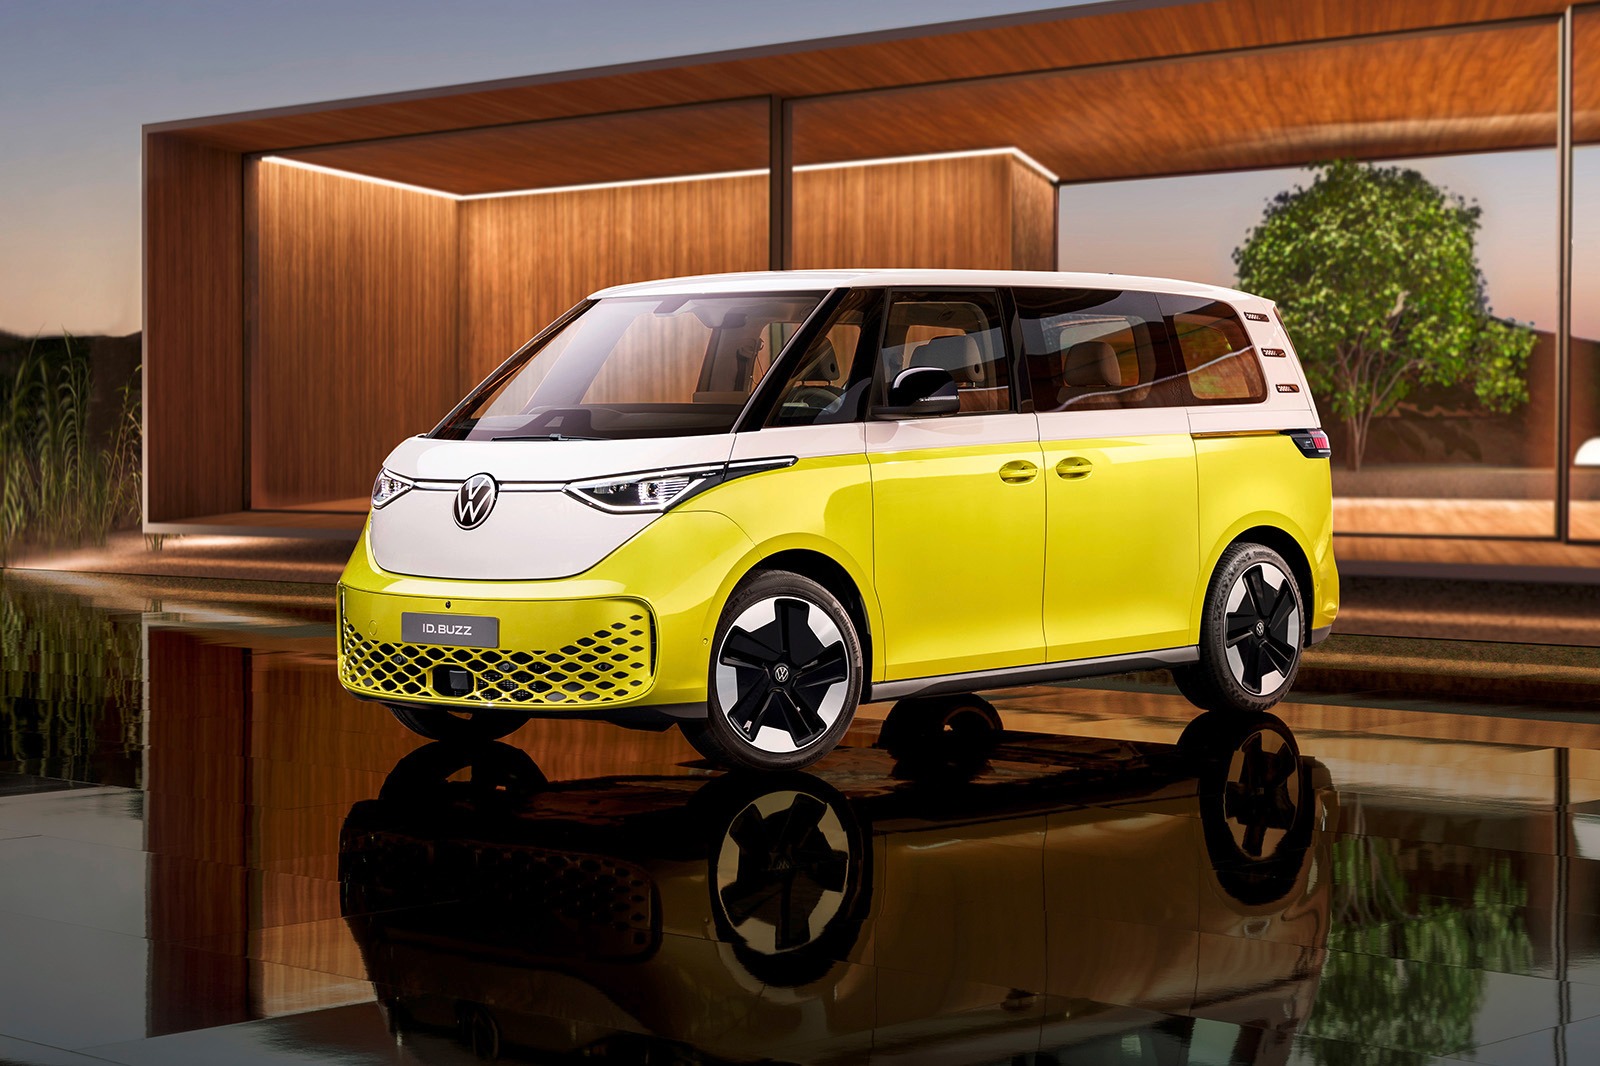 Return of the Bus! Volkswagen ID. Buzz Shows Off Production Design